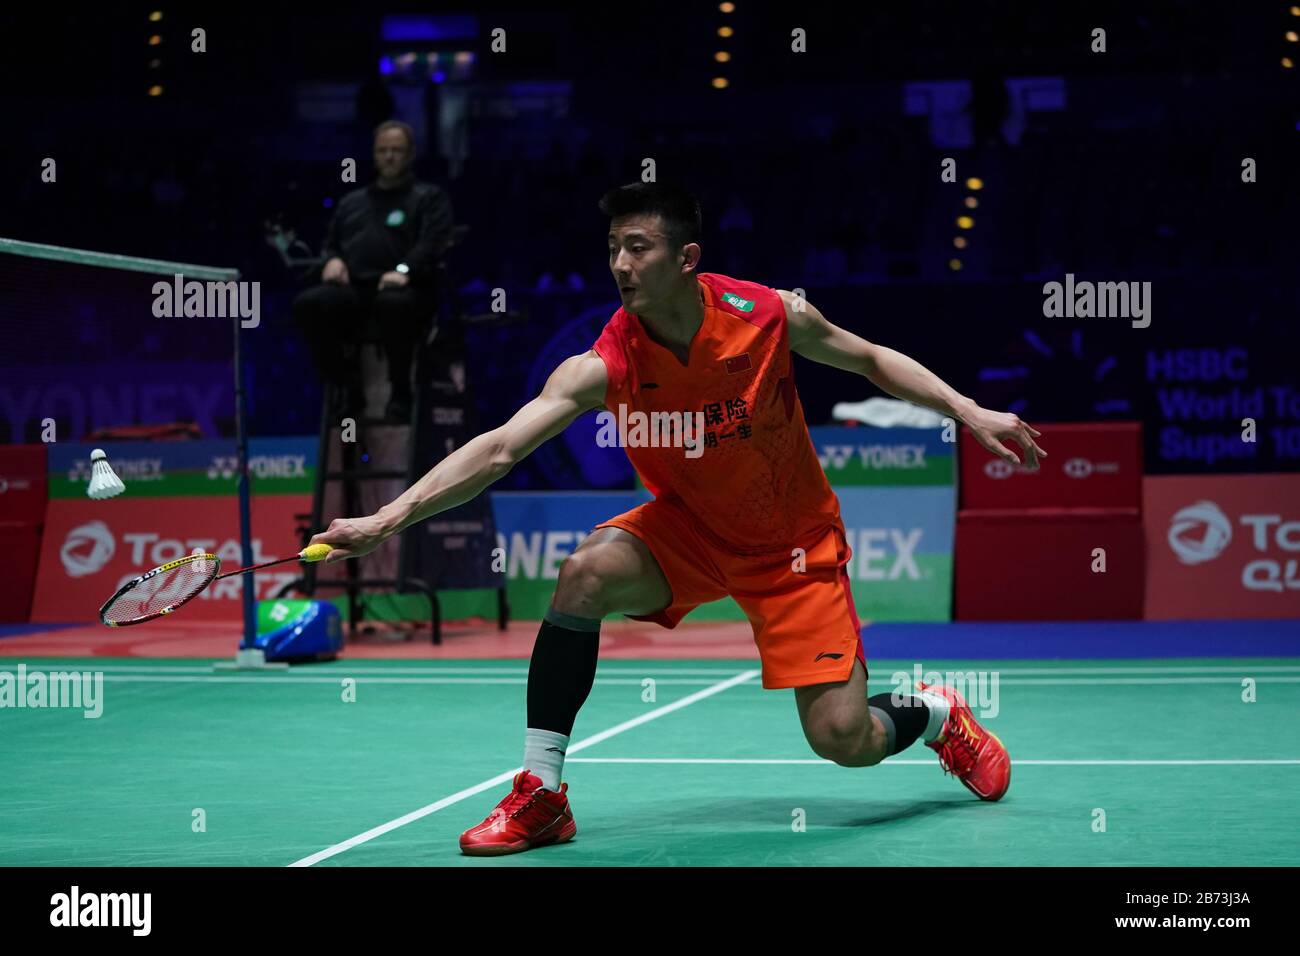 Chinas Chen Long in action in his Mens singles match during the YONEX All England Open Badminton Championships at Arena Birmingham Stock Photo